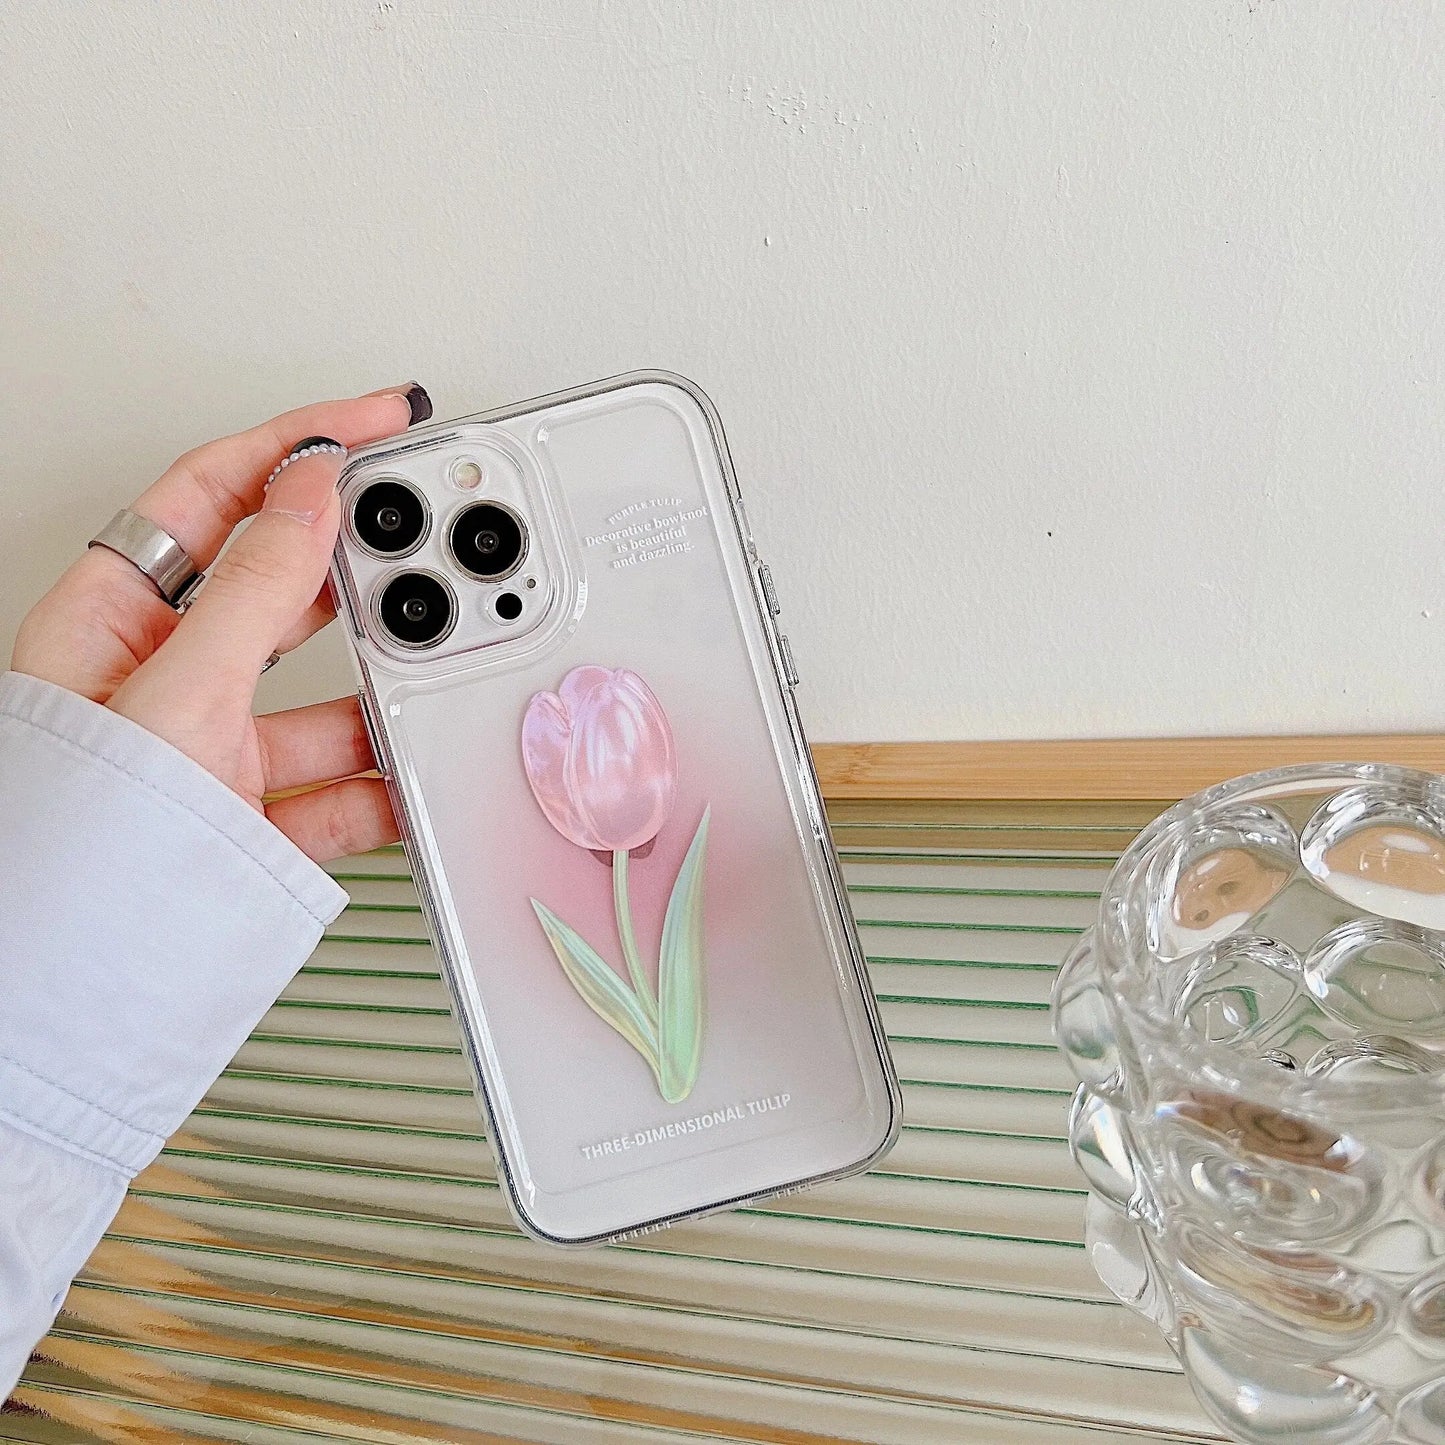 Pink Tulip Flower Phone Cases For iPhone